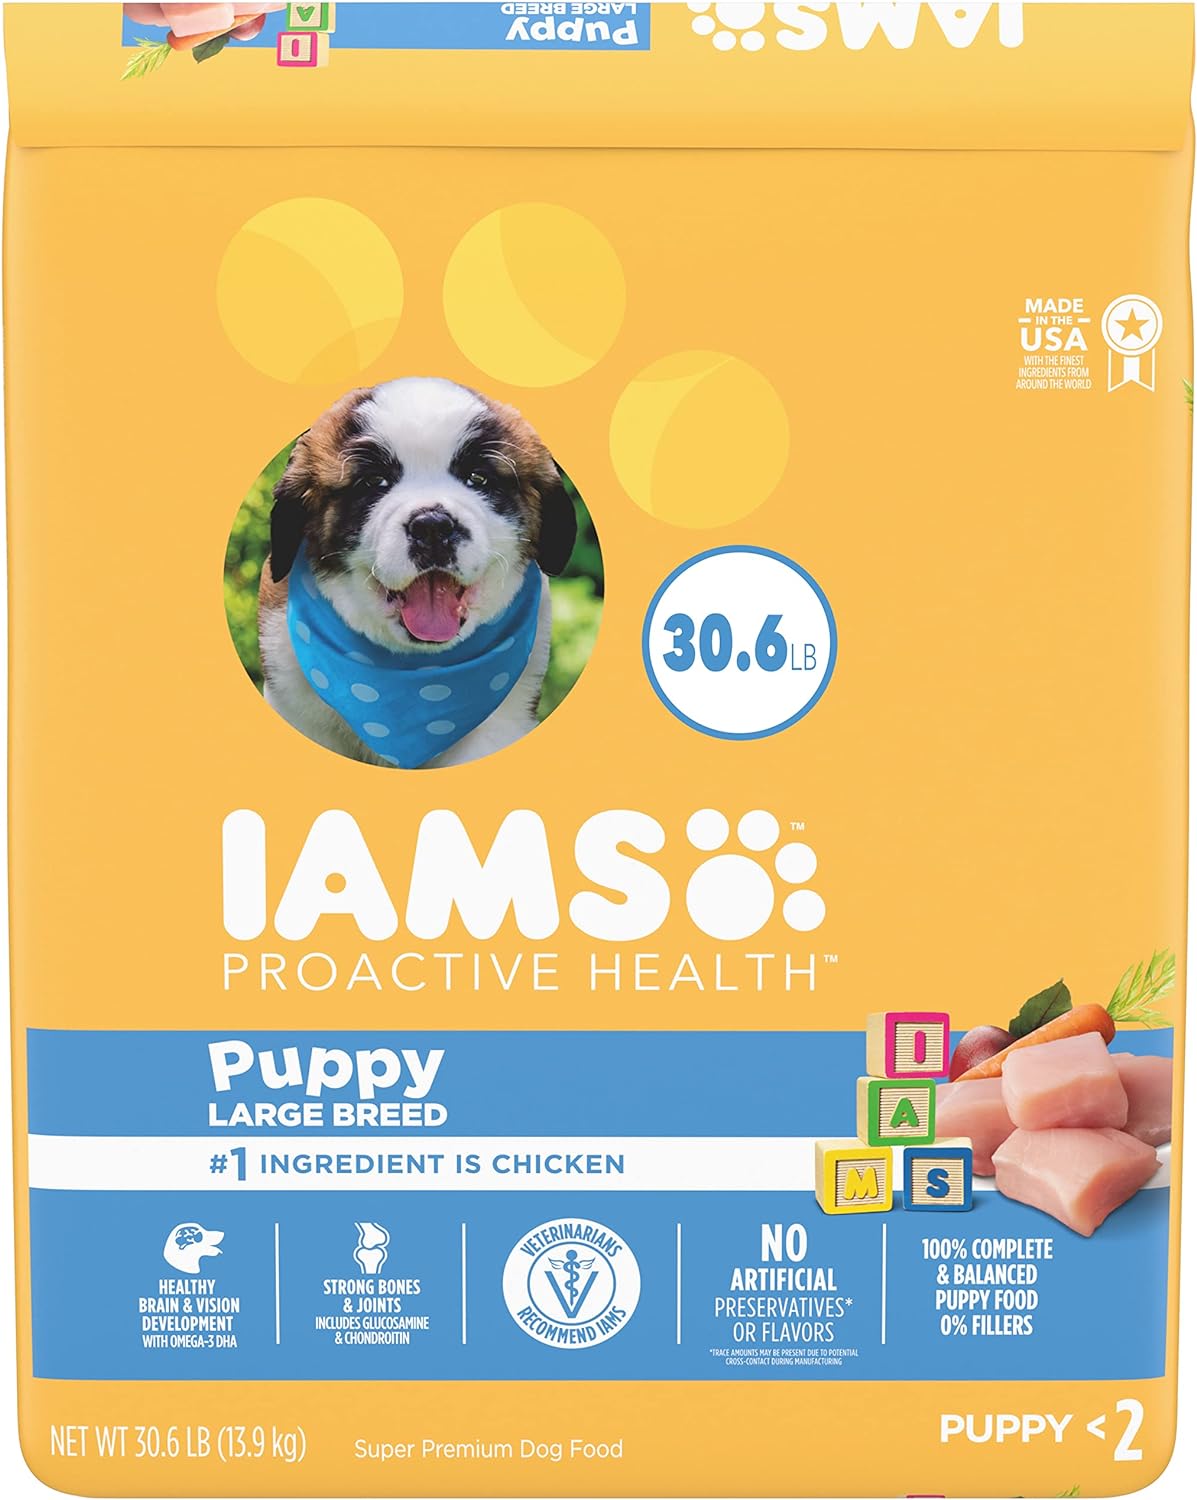 Iams Puppy Large Breed Dry Dog Food – Gallery Image 1